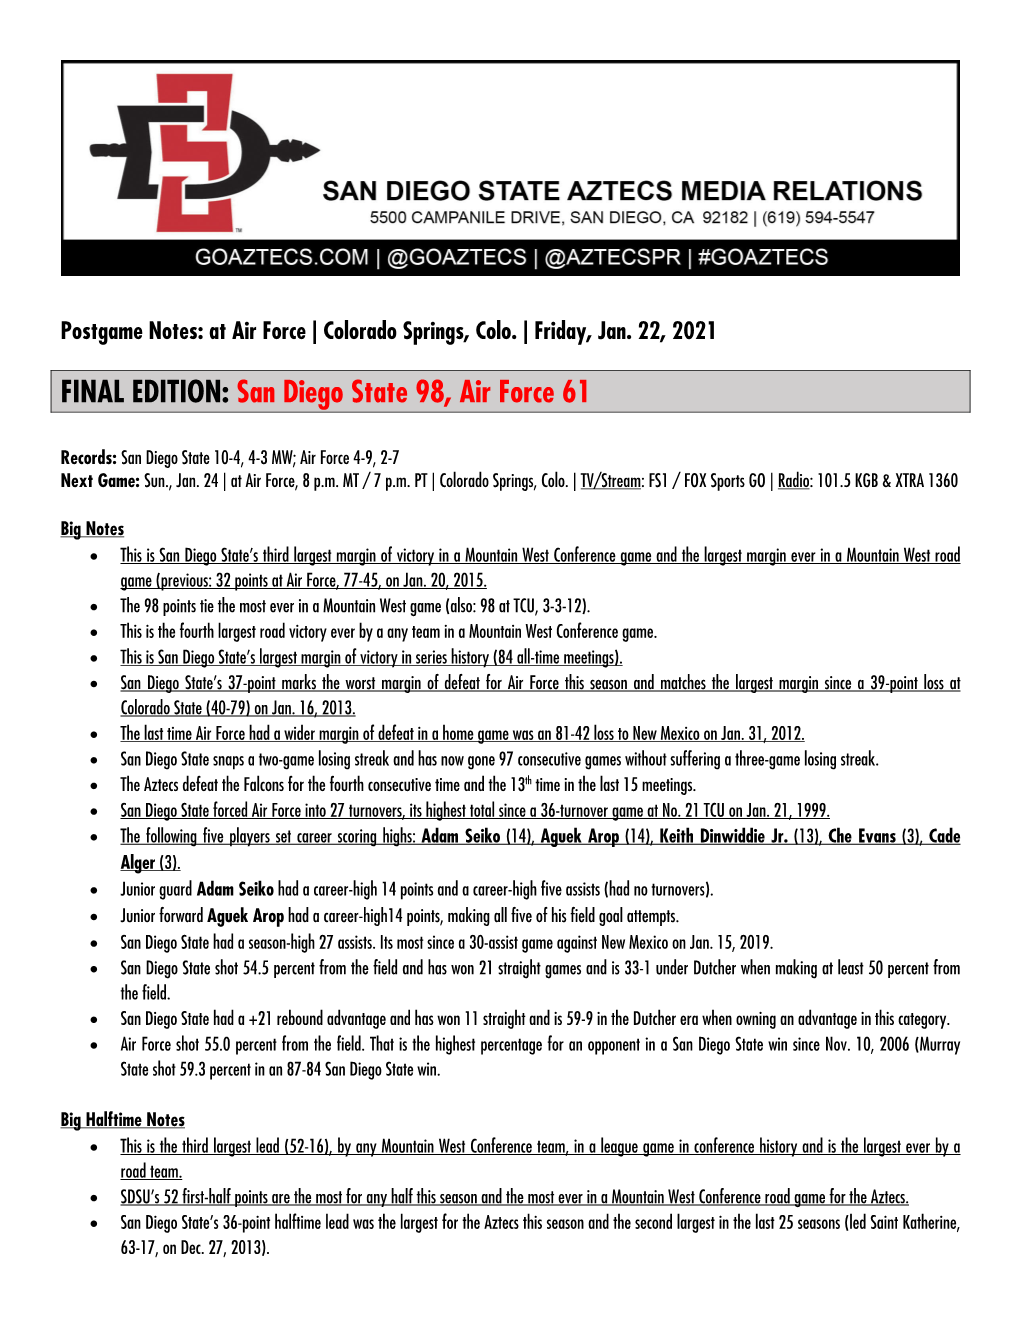 FINAL EDITION: San Diego State 98, Air Force 61